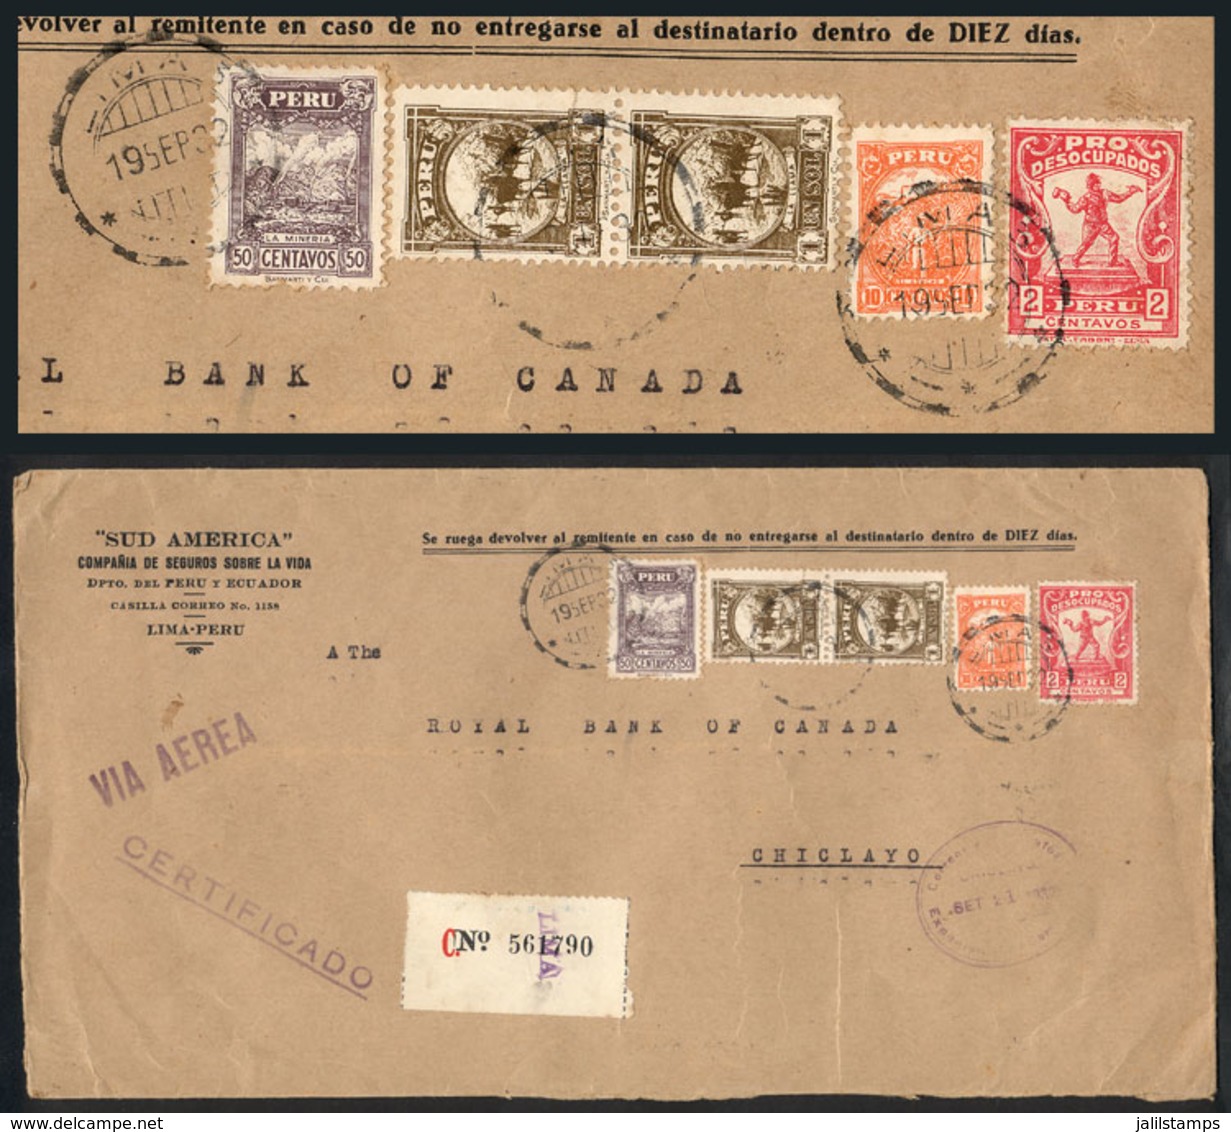 PERU: 19/SE/1932 Lima - Chiclayo, Registered Airmail Cover Franked With 2.60S. + 2c. Cinderella Pro-Desocupados, Excelle - Perú